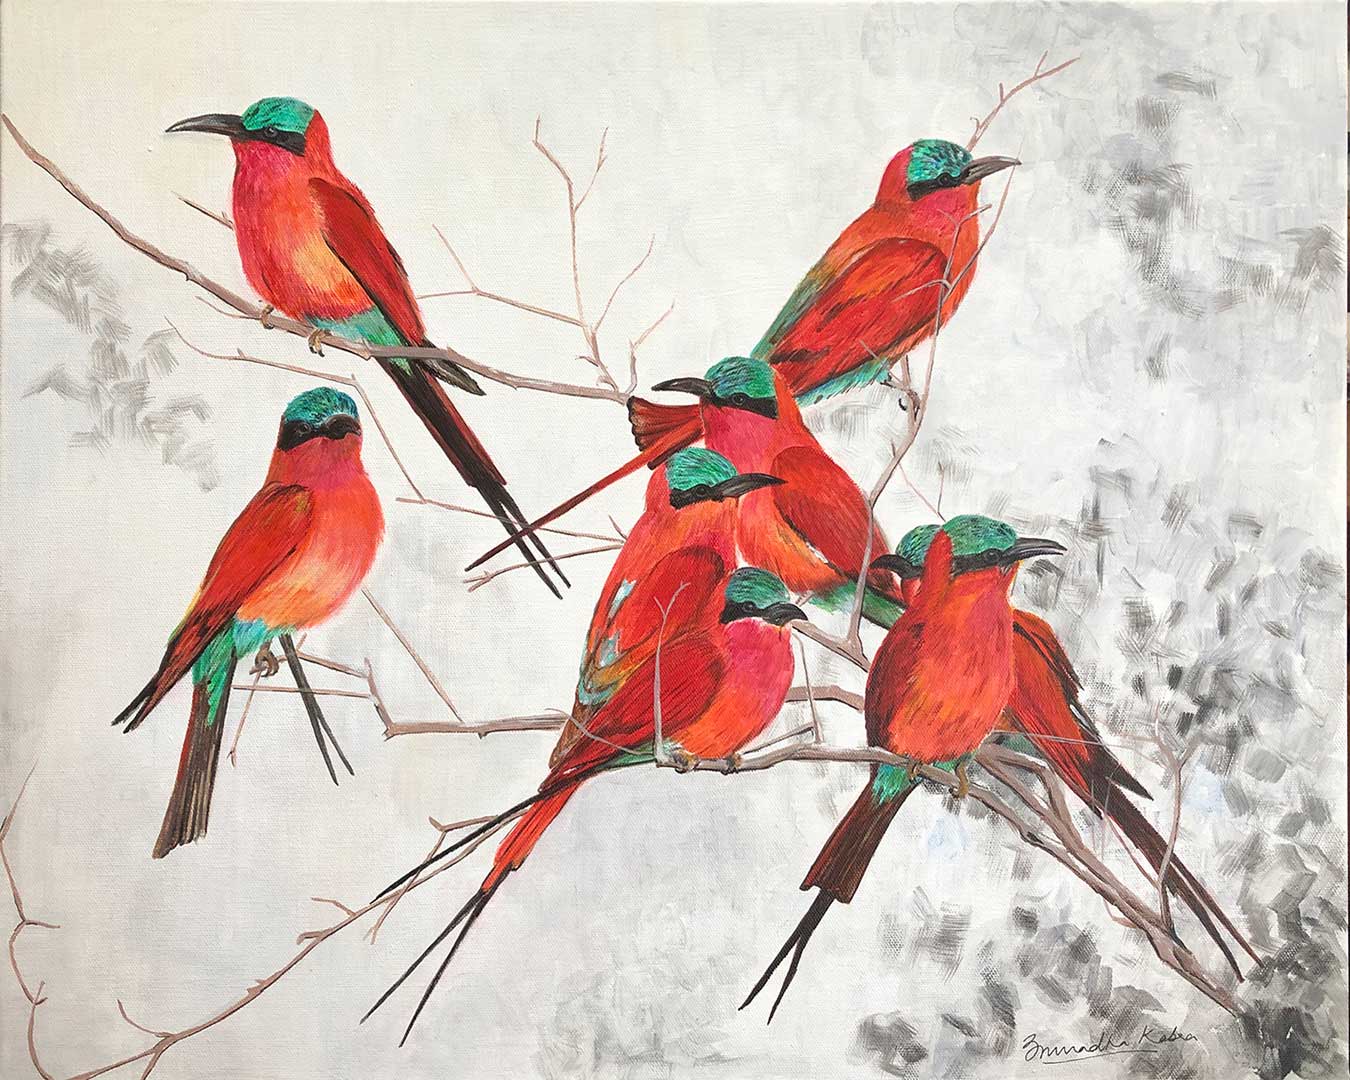 Buy painting online Singapore A Bevy of Carmine Bee Eaters Anuradha Kabra India Exquisite Art